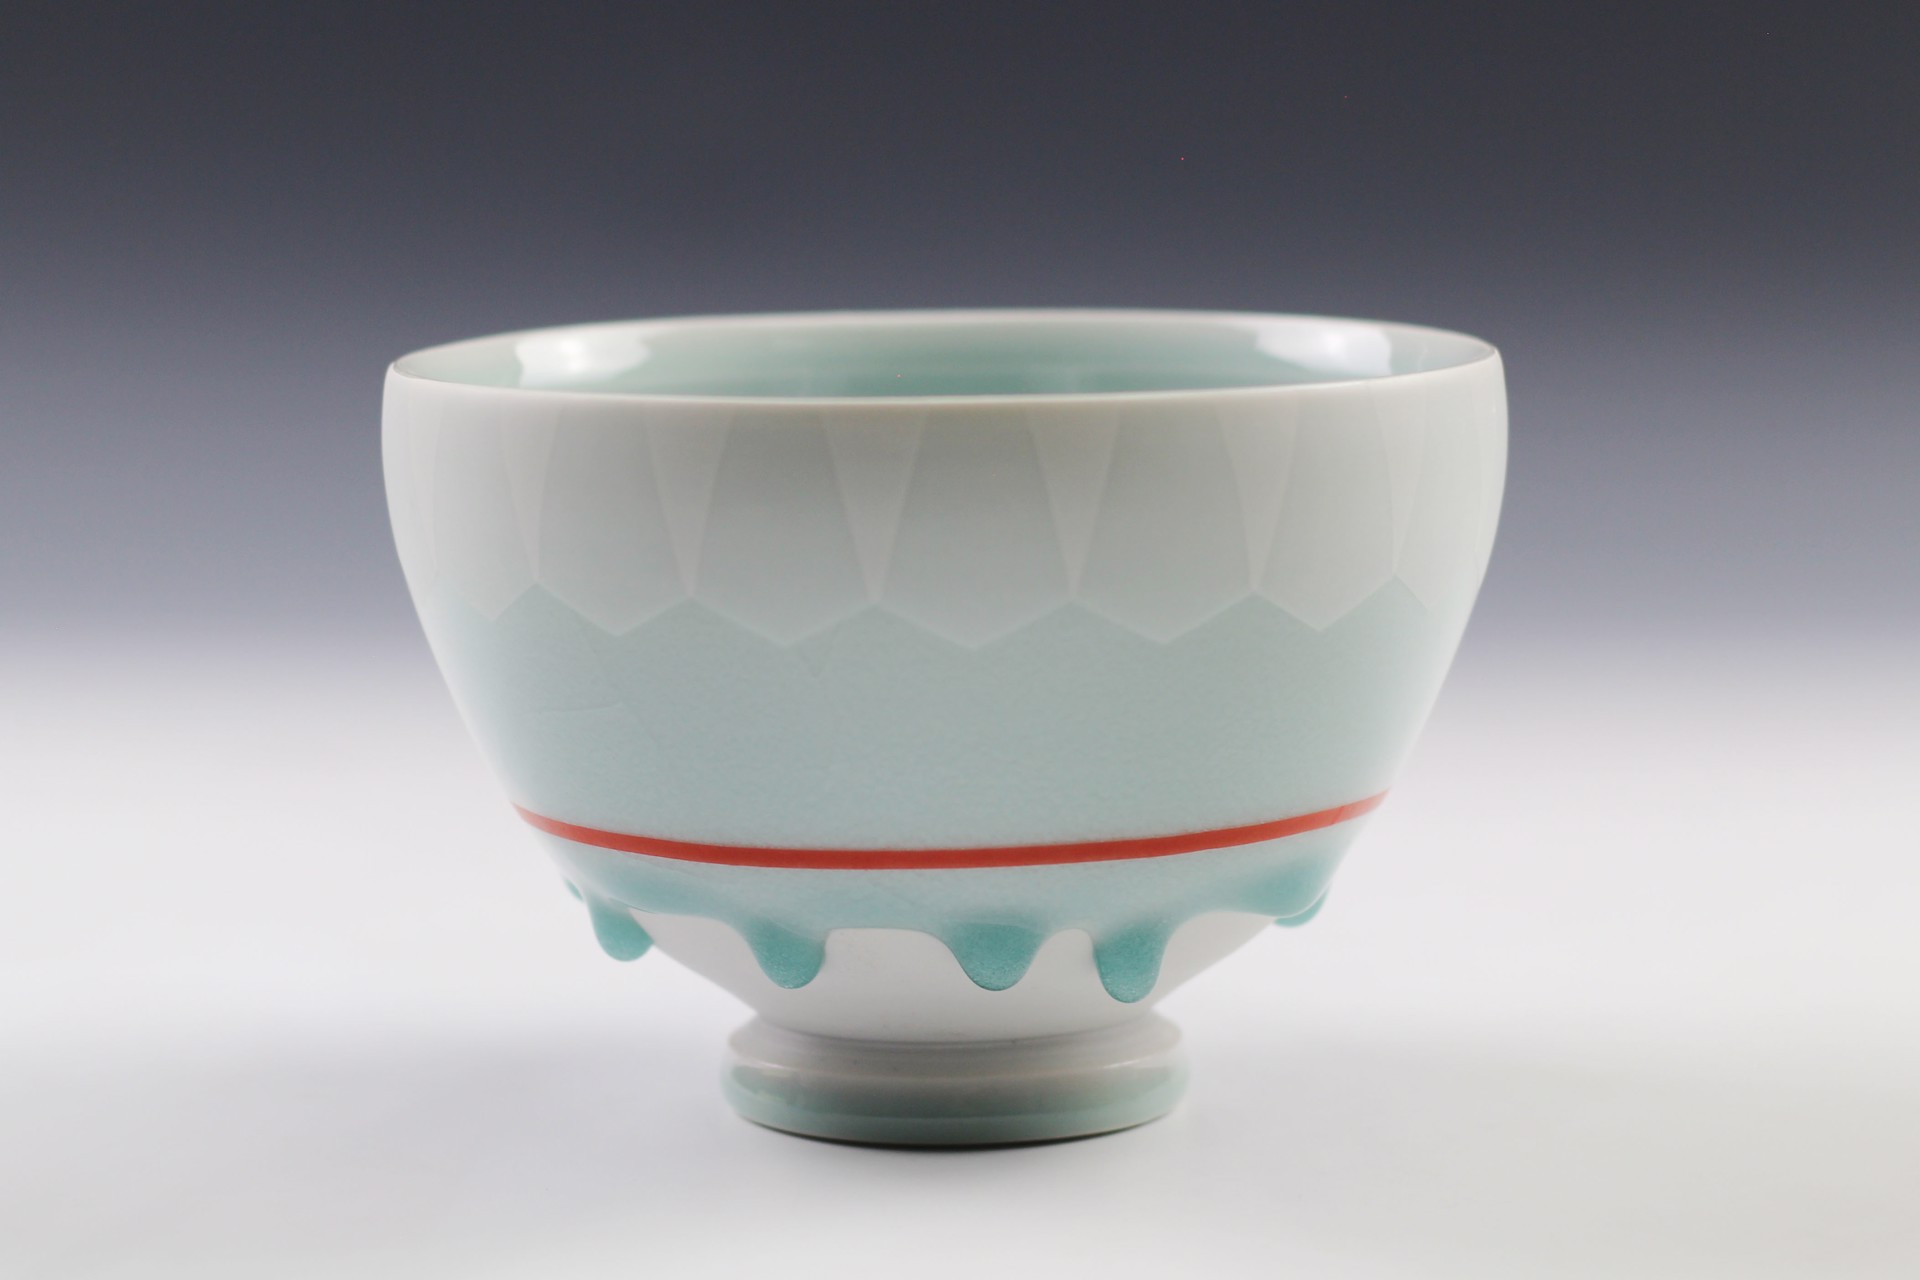 Bowl by Paul Donnelly